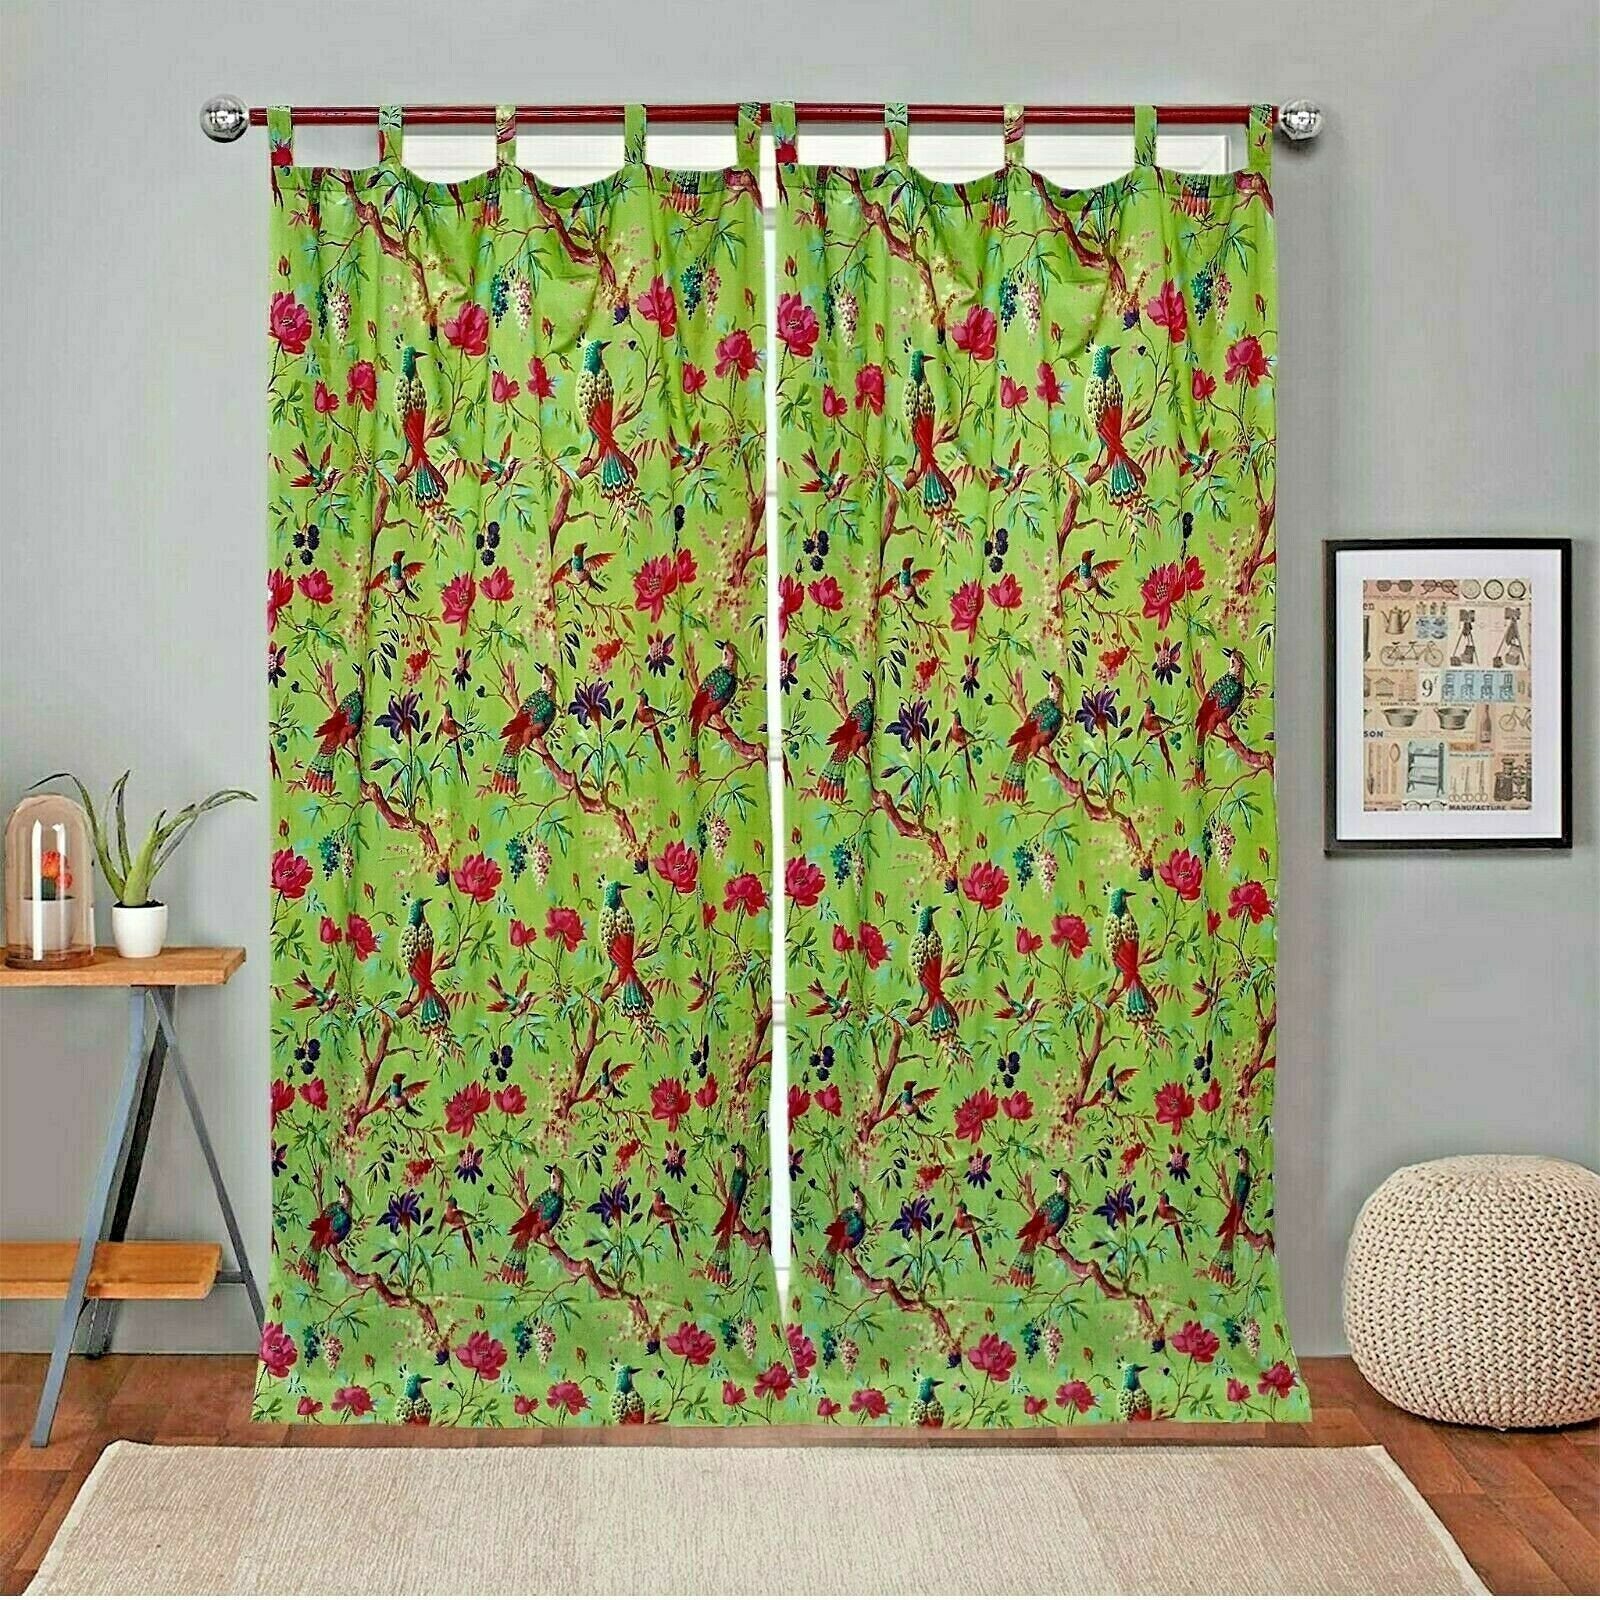 Frida Kahlo boho curtains, eclectic curtains, Frida curtains, boho decor, boho curtain panels, boho home decor TWO PANELS, l Christmas gift Decor